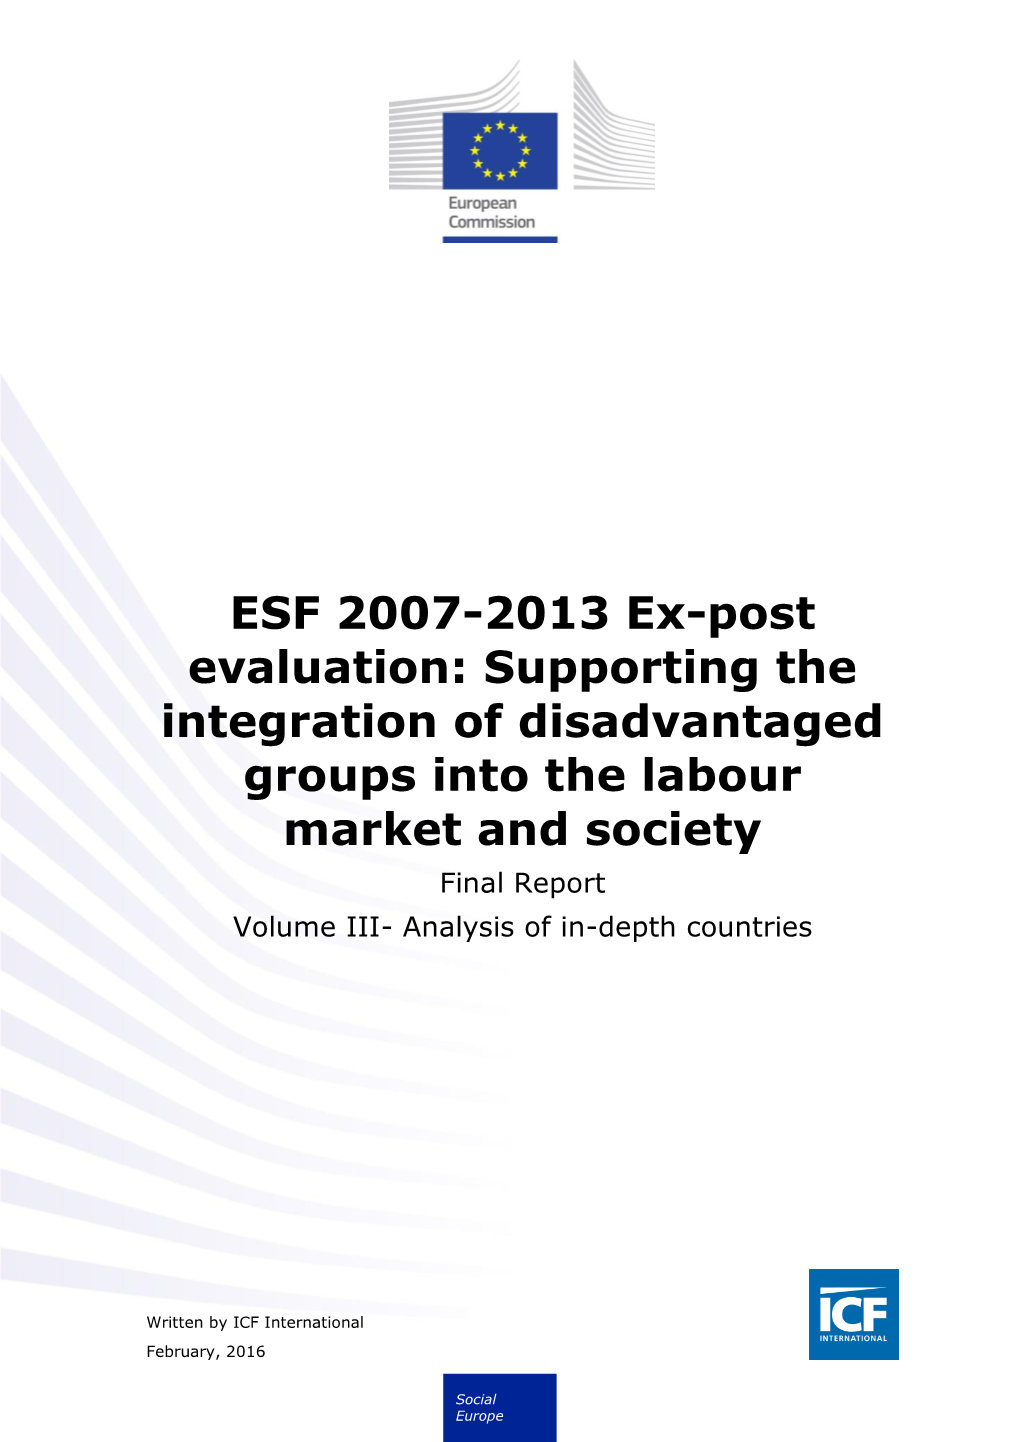 Supporting the Integration of Disadvantaged Groups Into the Labour Market and Society Final Report Volume III- Analysis of In-Depth Countries